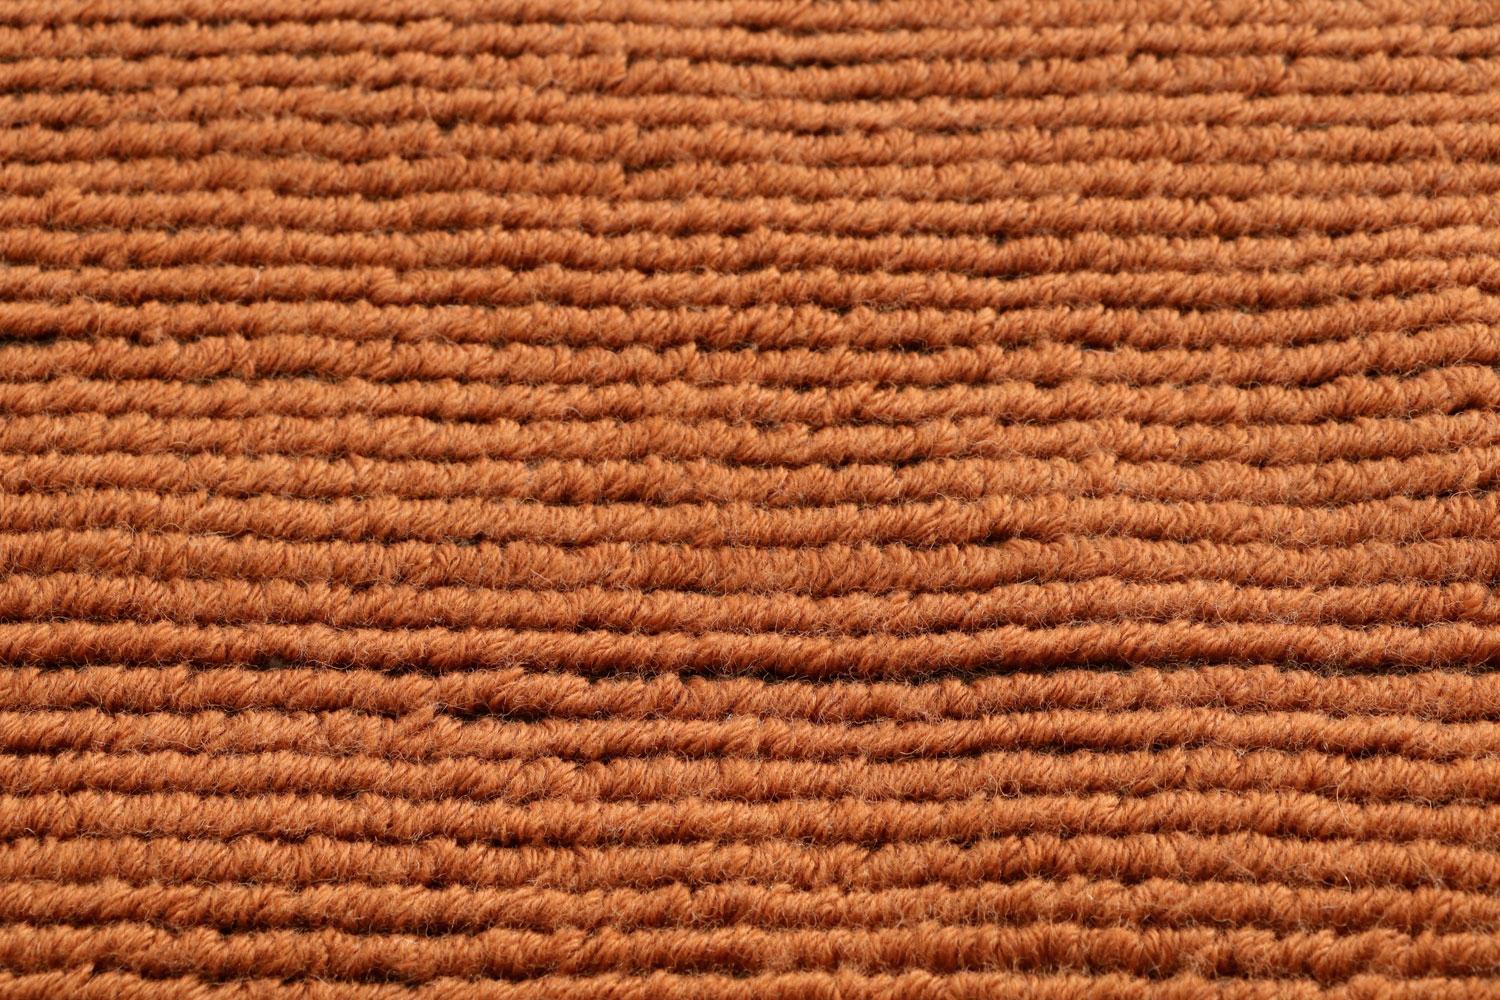 Woven Contemporary Soft Orange Pure Wool Rug by Deanna Comellini In Stock 170x240 cm For Sale